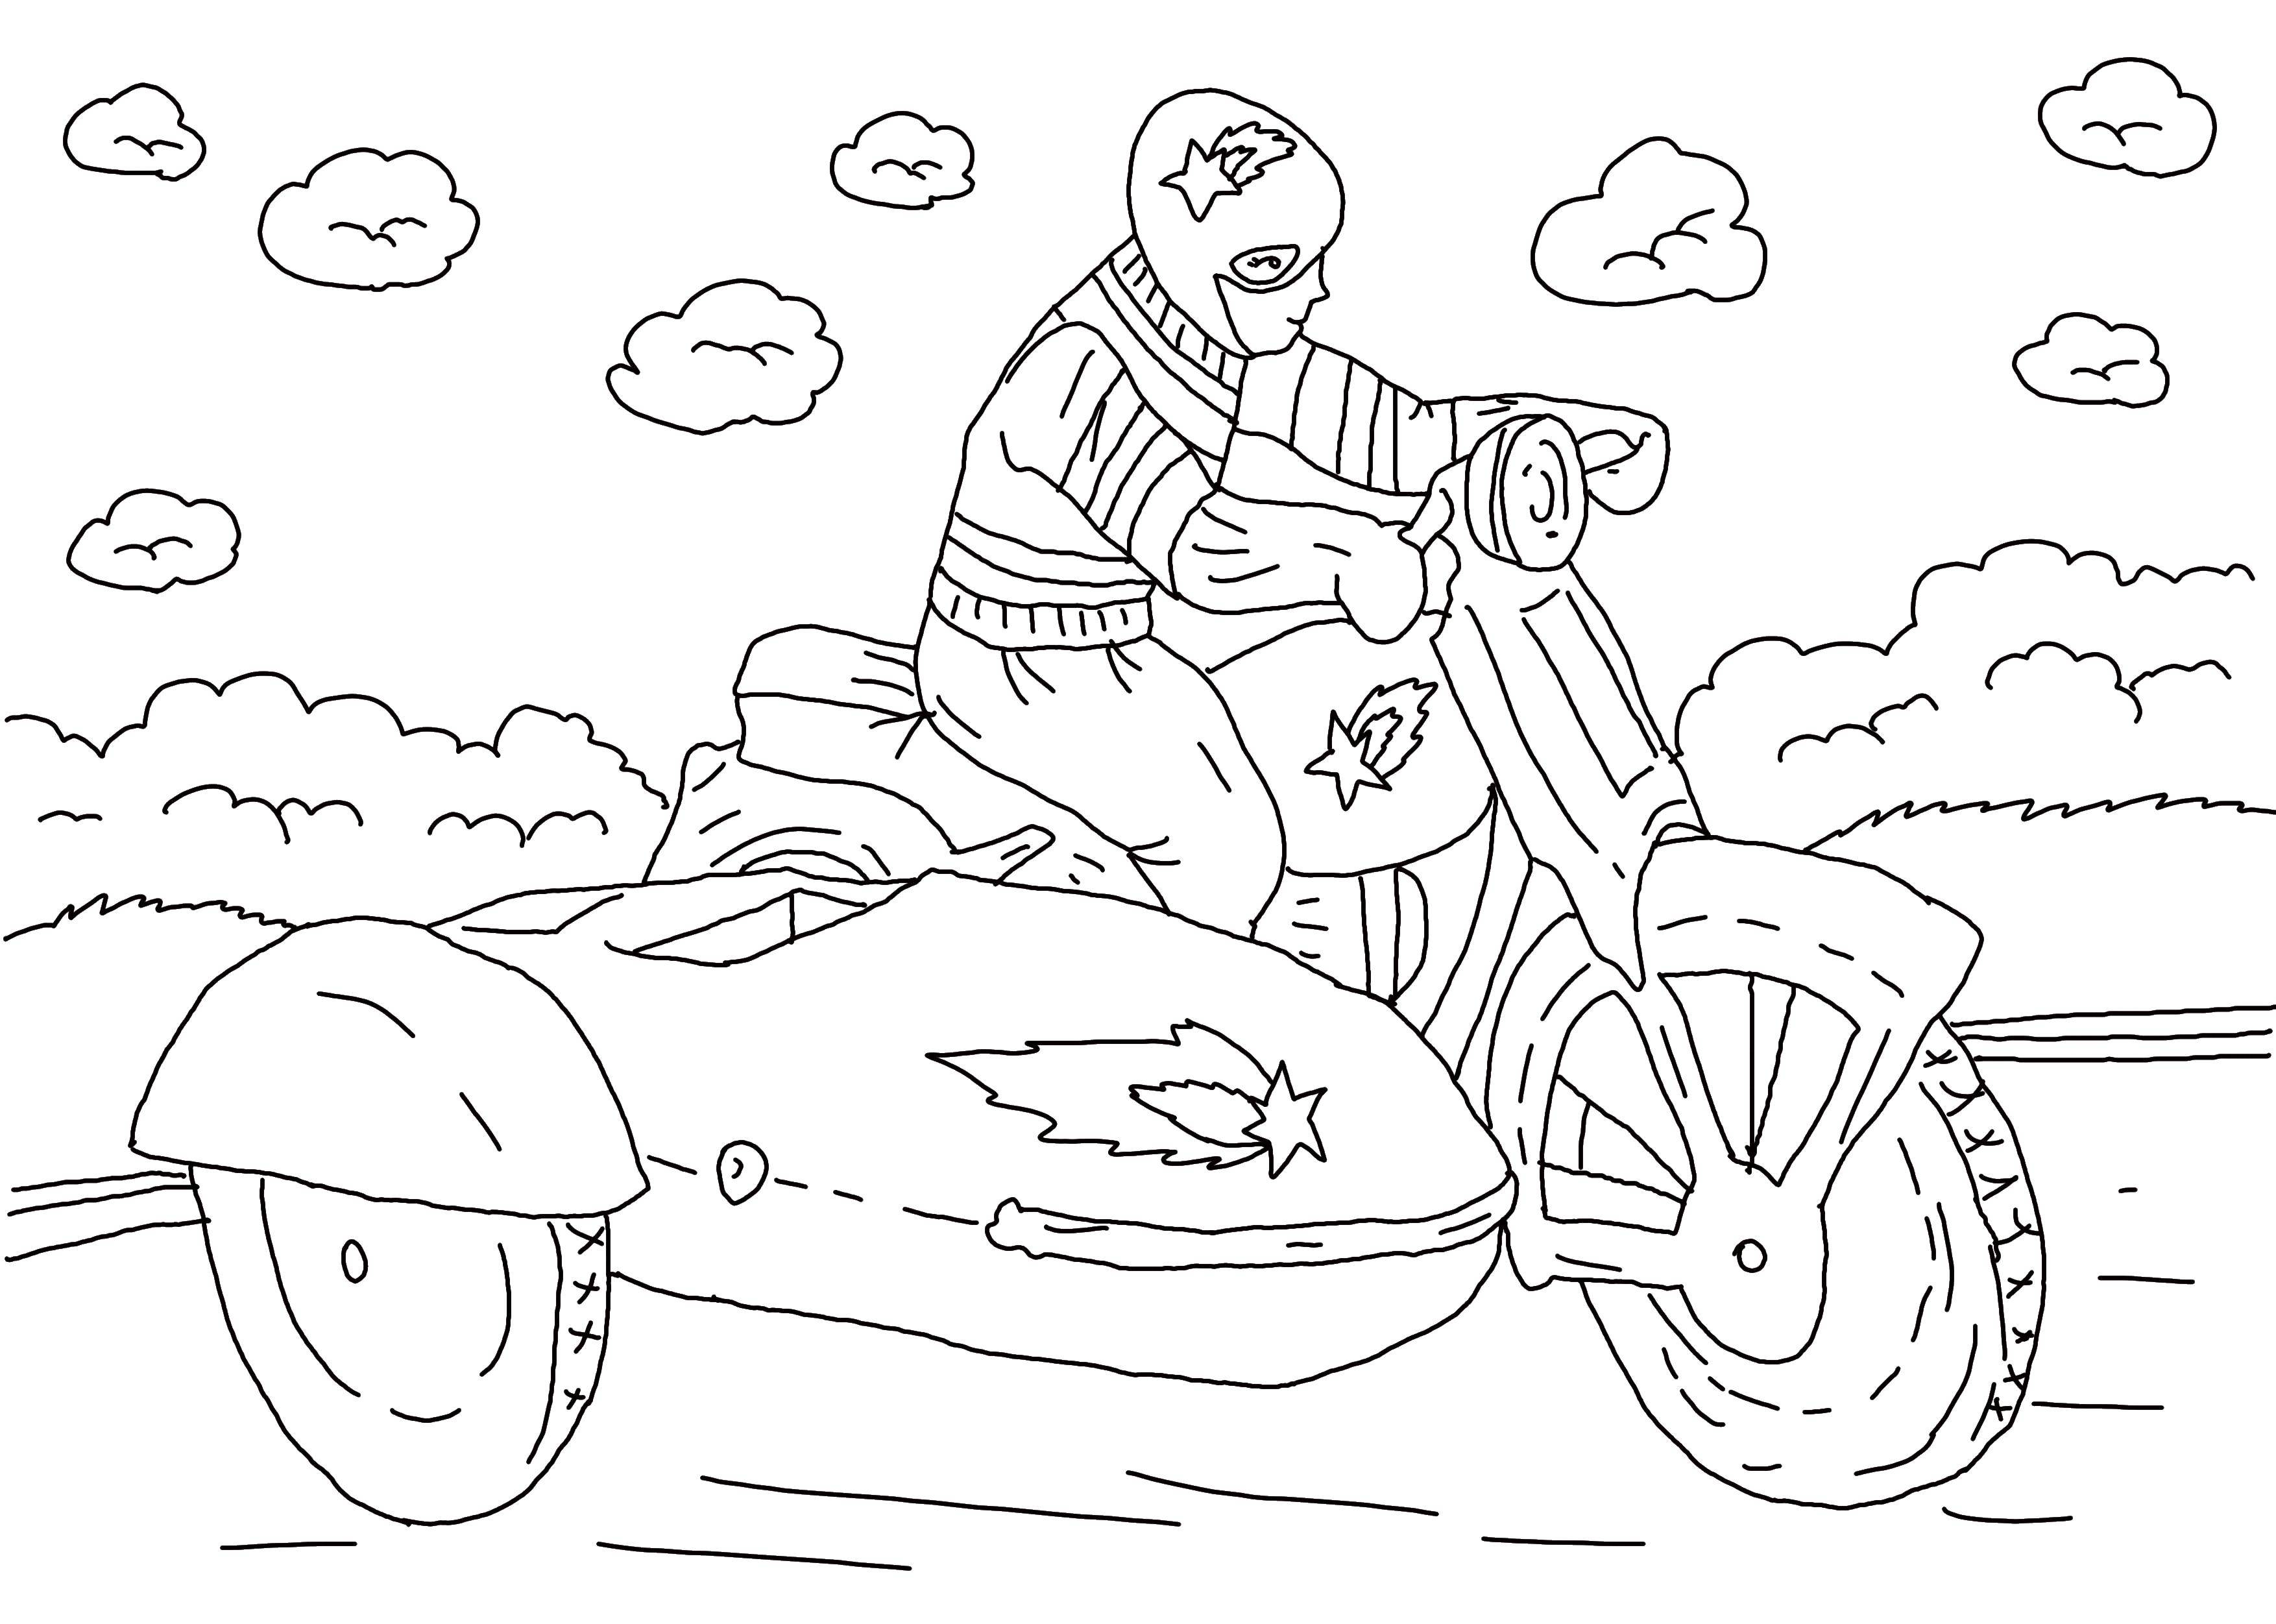 Coloring The guy on the motorcycle. Category transportation. Tags:  motorcycle, guy, road.